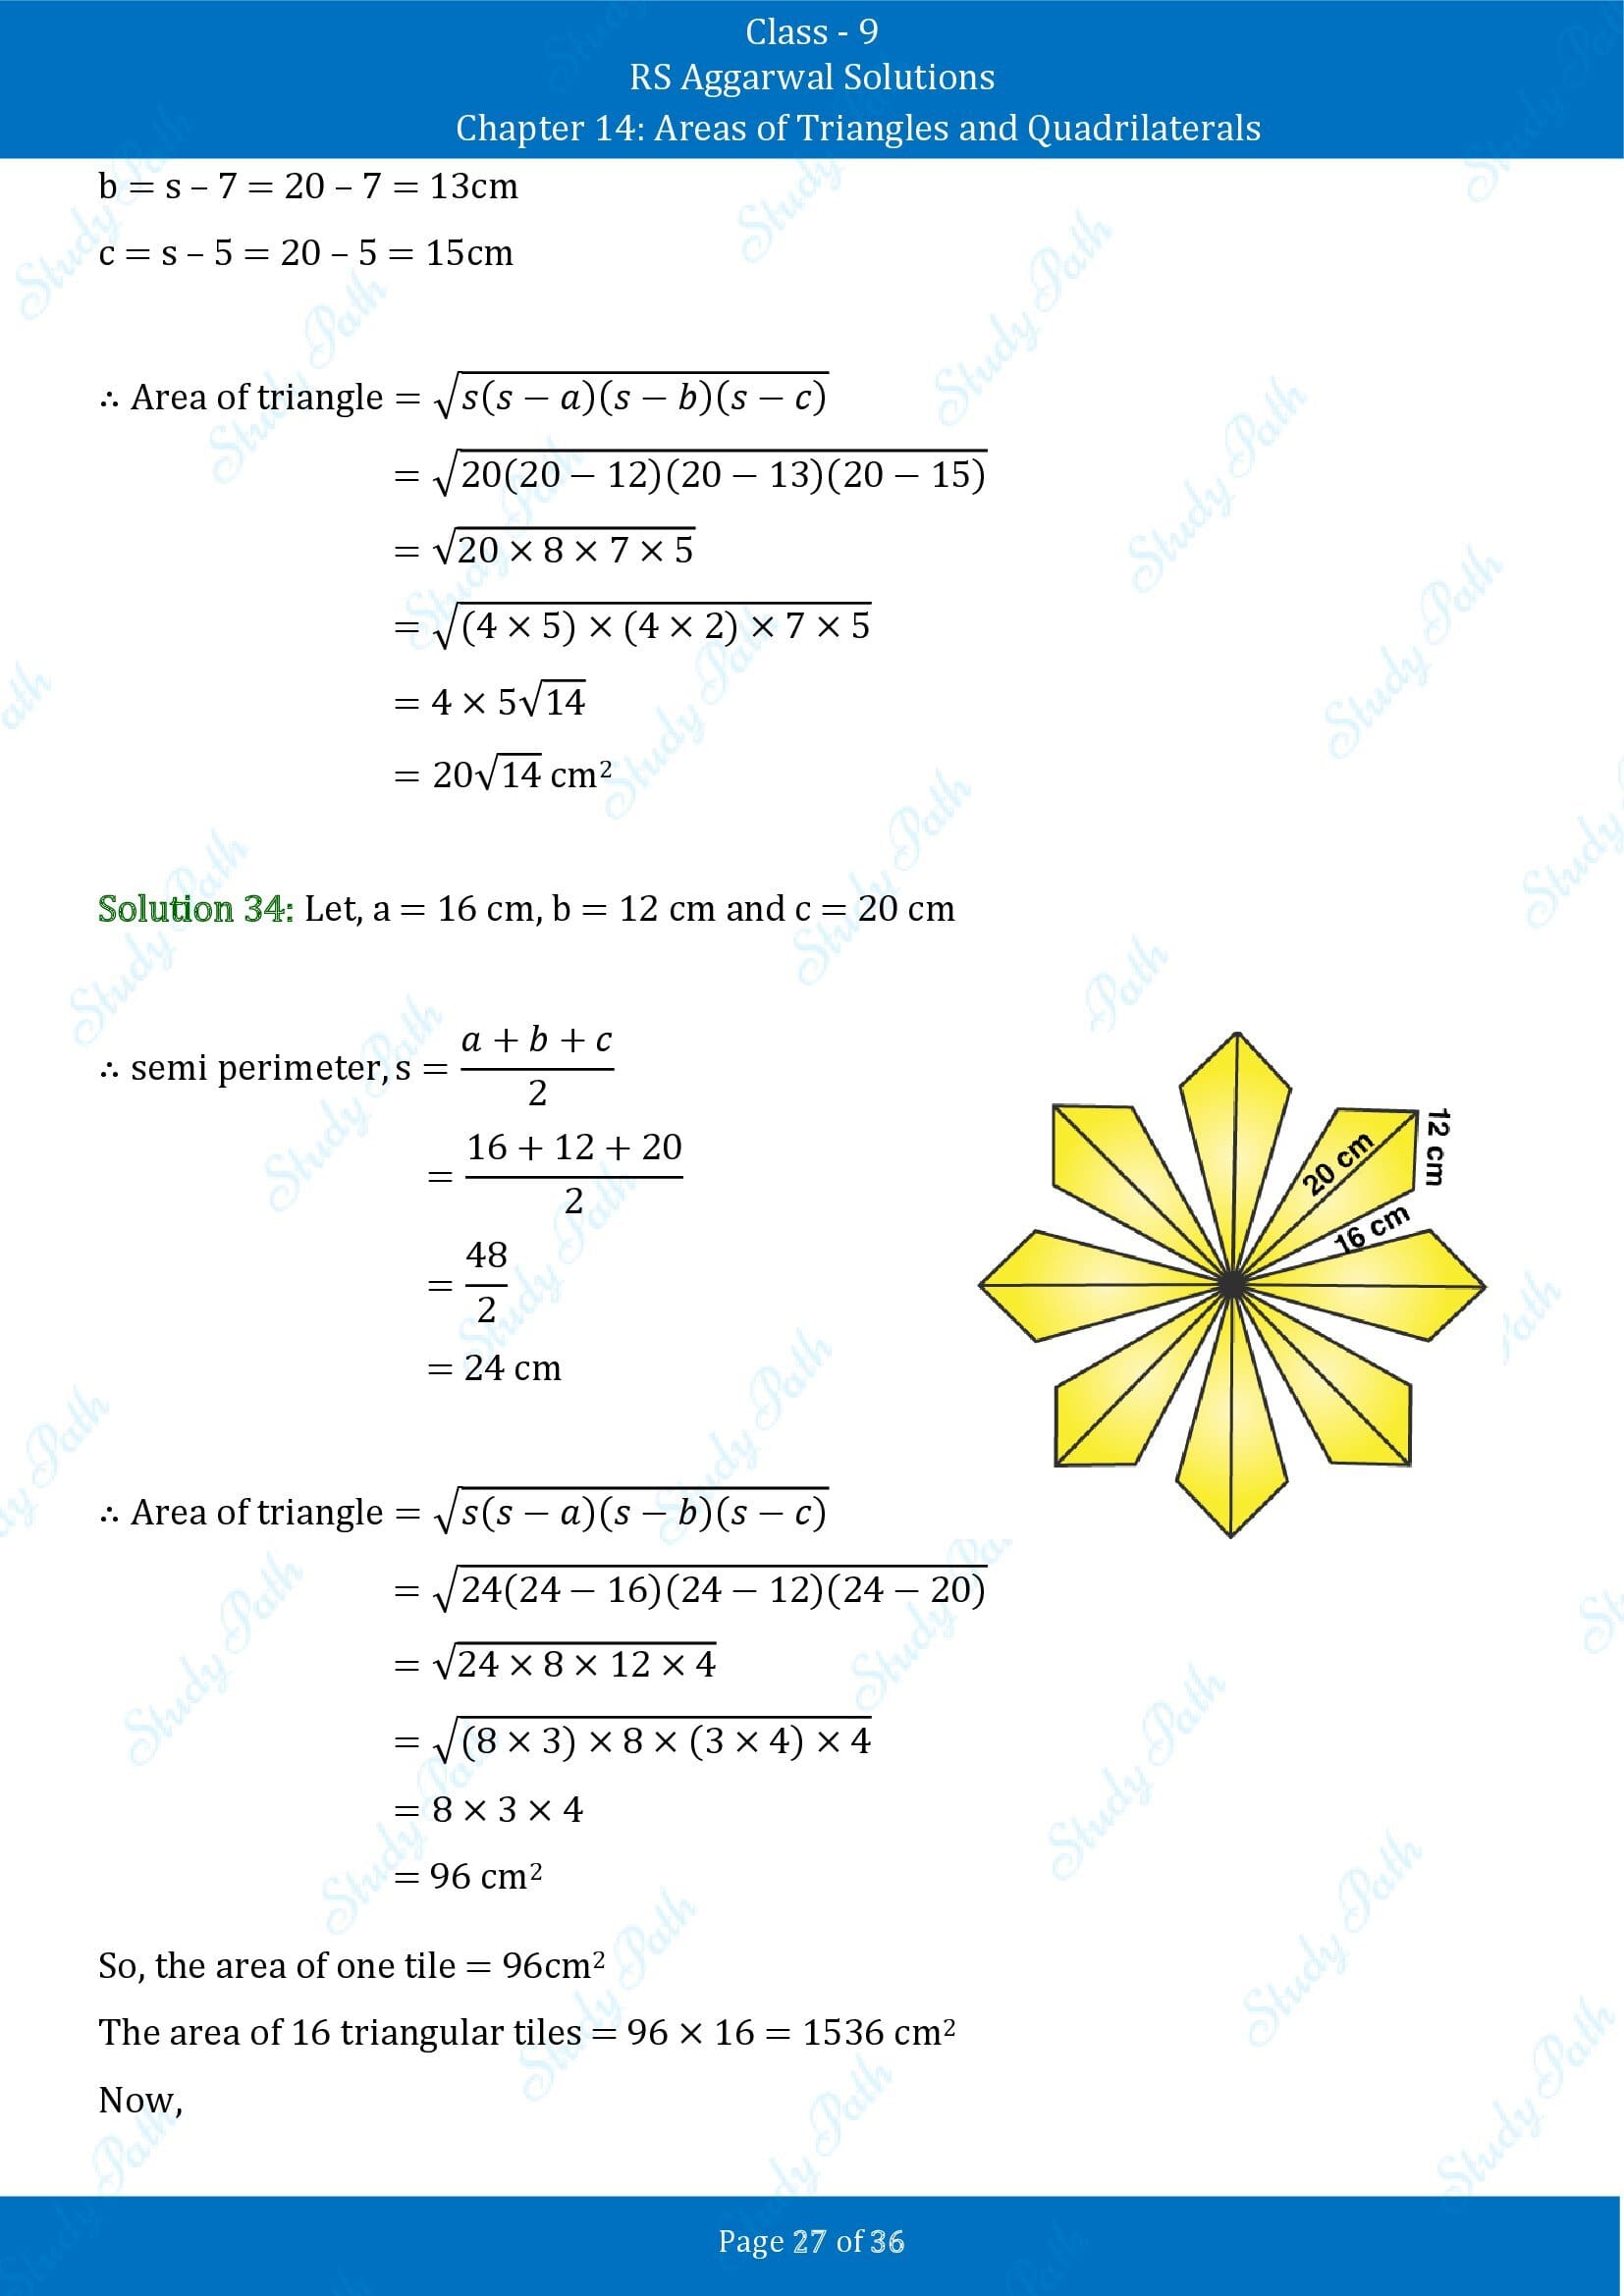 RS Aggarwal Solutions Class 9 Chapter 14 Areas of Triangles and Quadrilaterals Exercise 14 00027